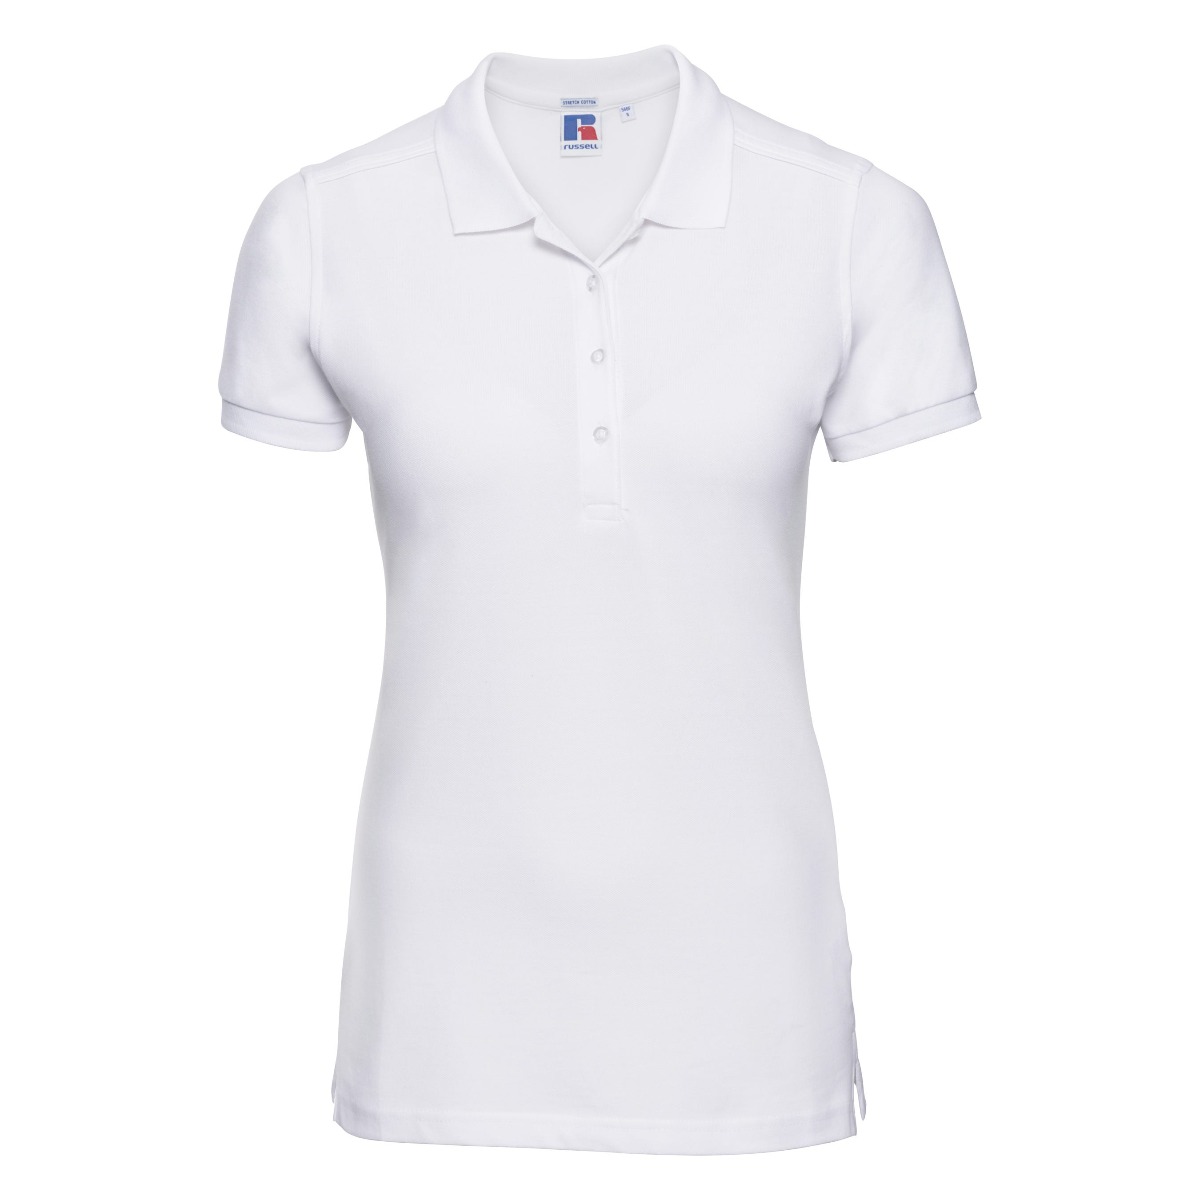 ax-httpswebsystems.s3.amazonaws.comtmp_for_downloadrussell-womens-stretch-white_5.jpg